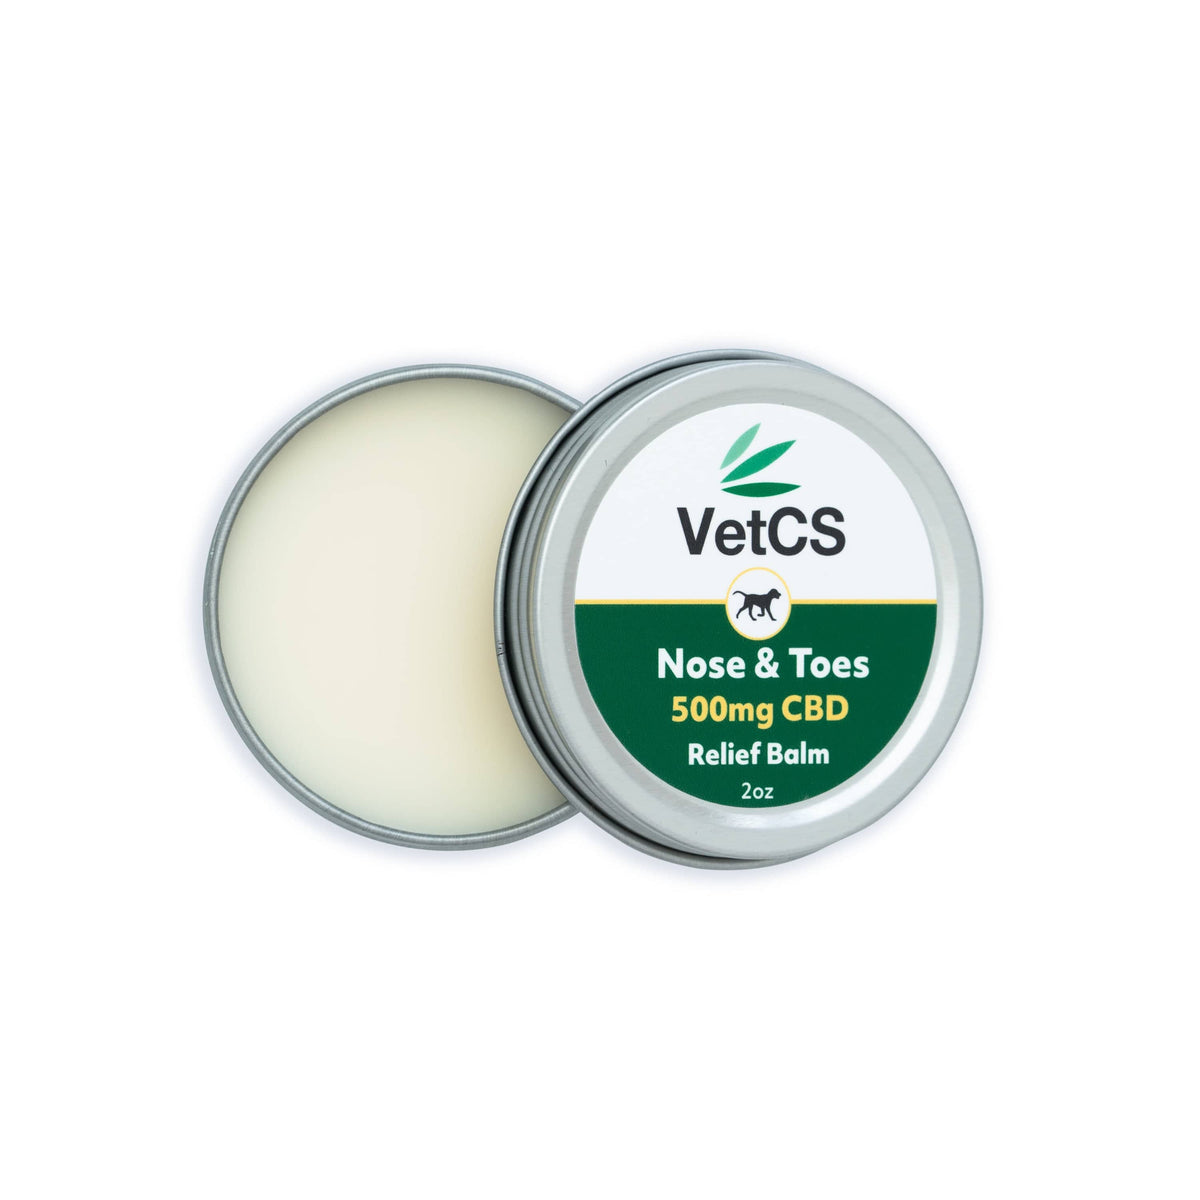 VetCS 2oz CBD Nose and Toes Palm for Dogs open